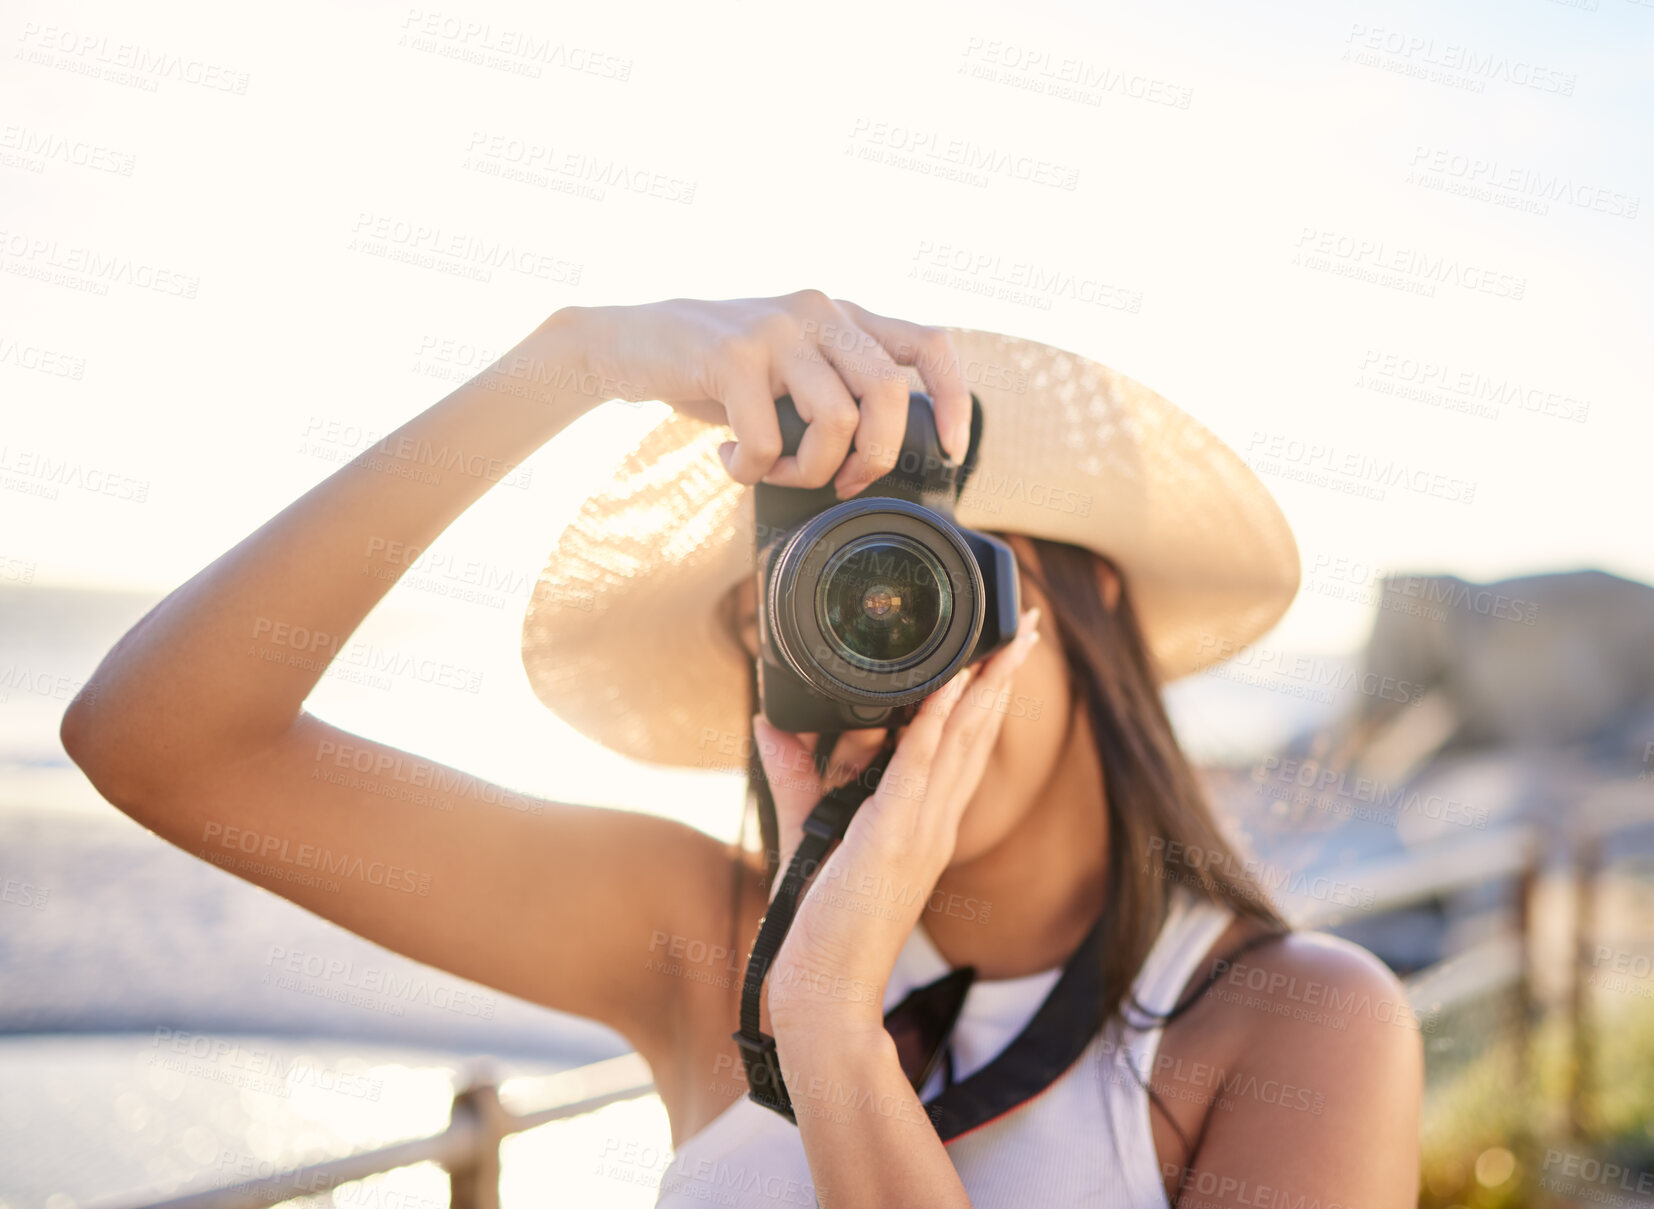 Buy stock photo Shot of a woman taking a picture with her camera while at the beach